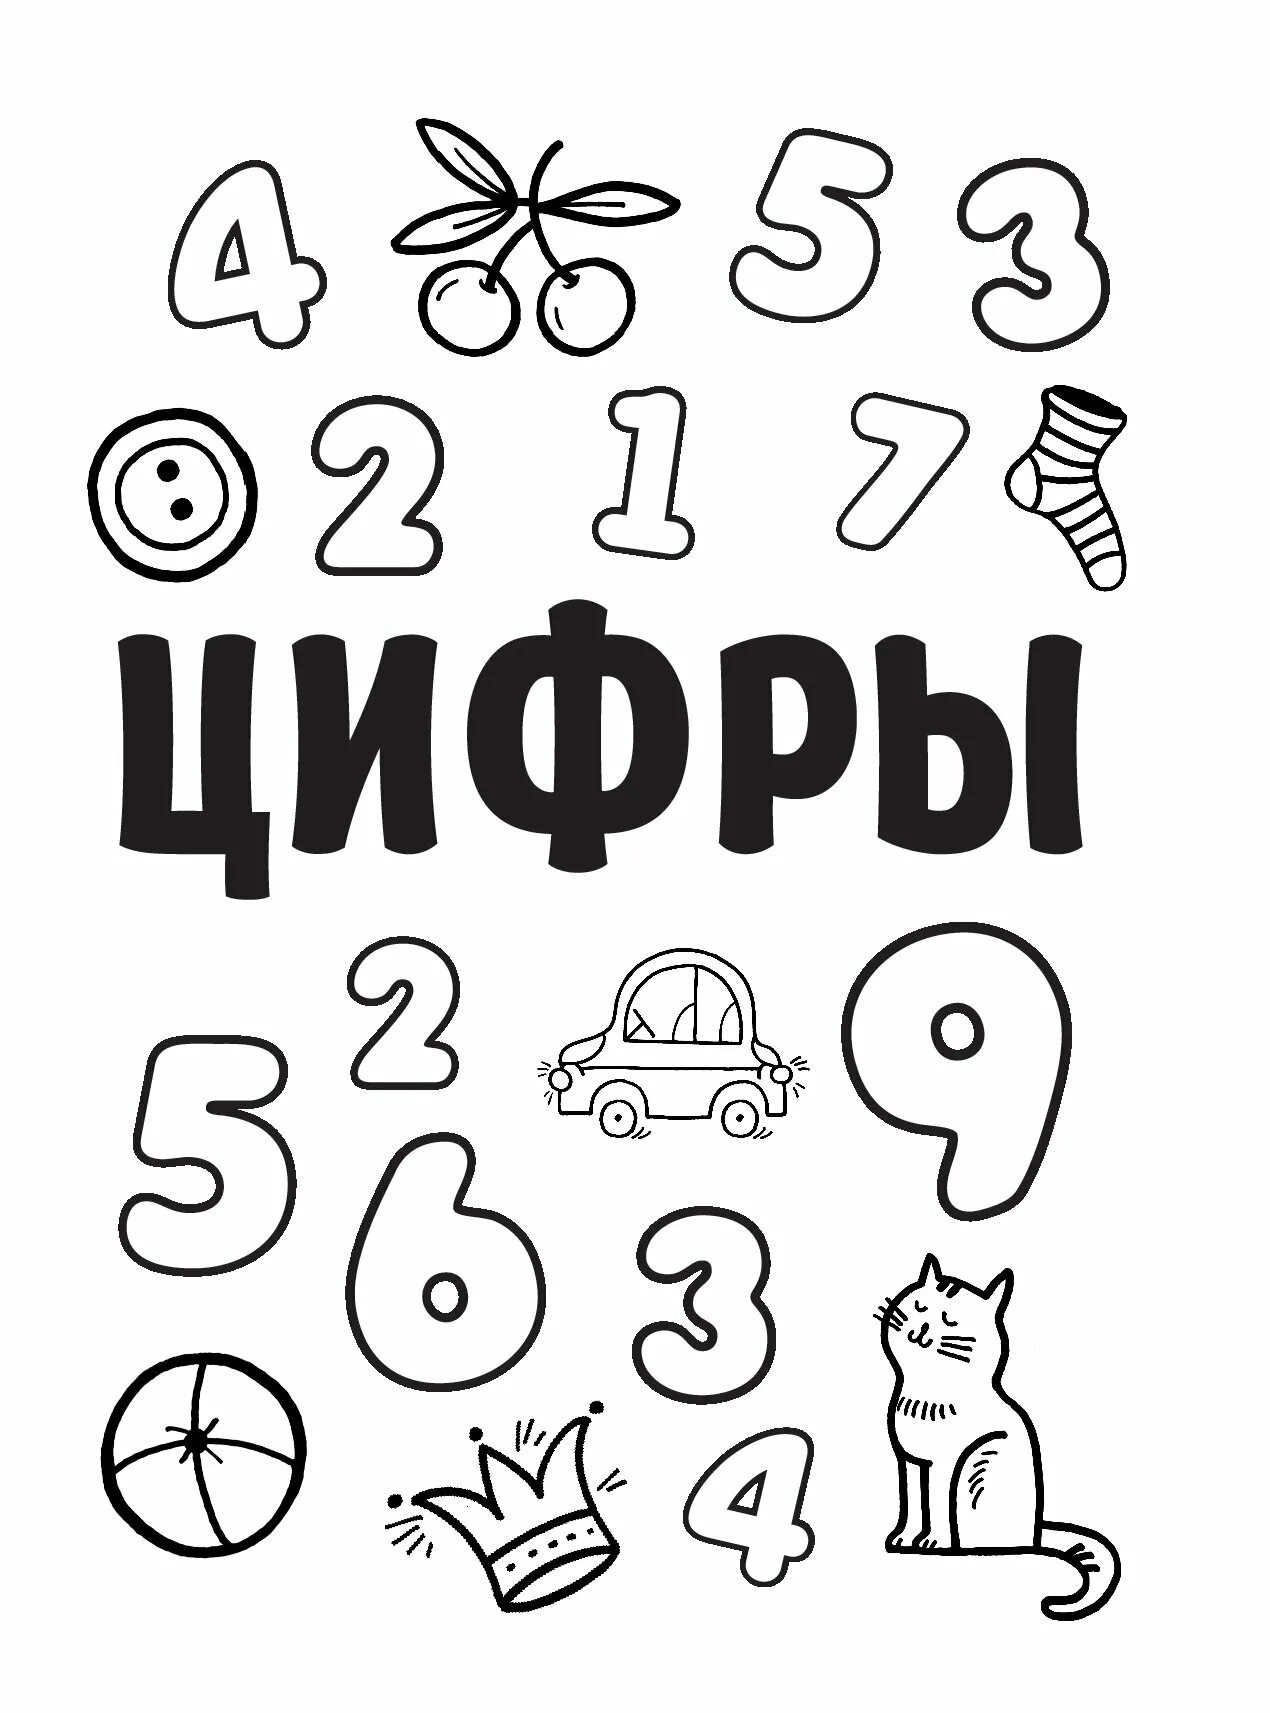 Creative letters and numbers coloring book for kids